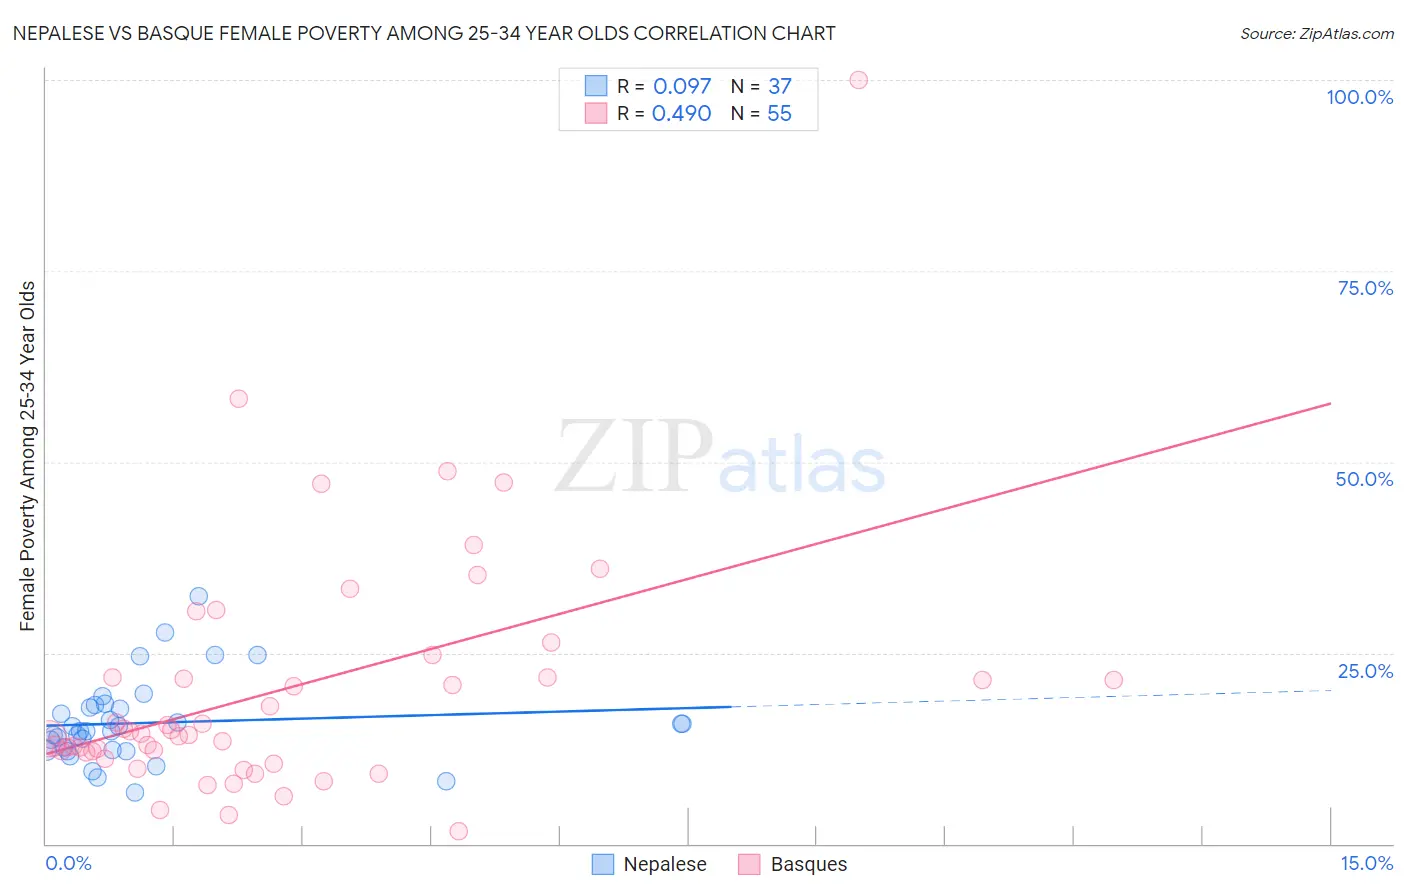 Nepalese vs Basque Female Poverty Among 25-34 Year Olds